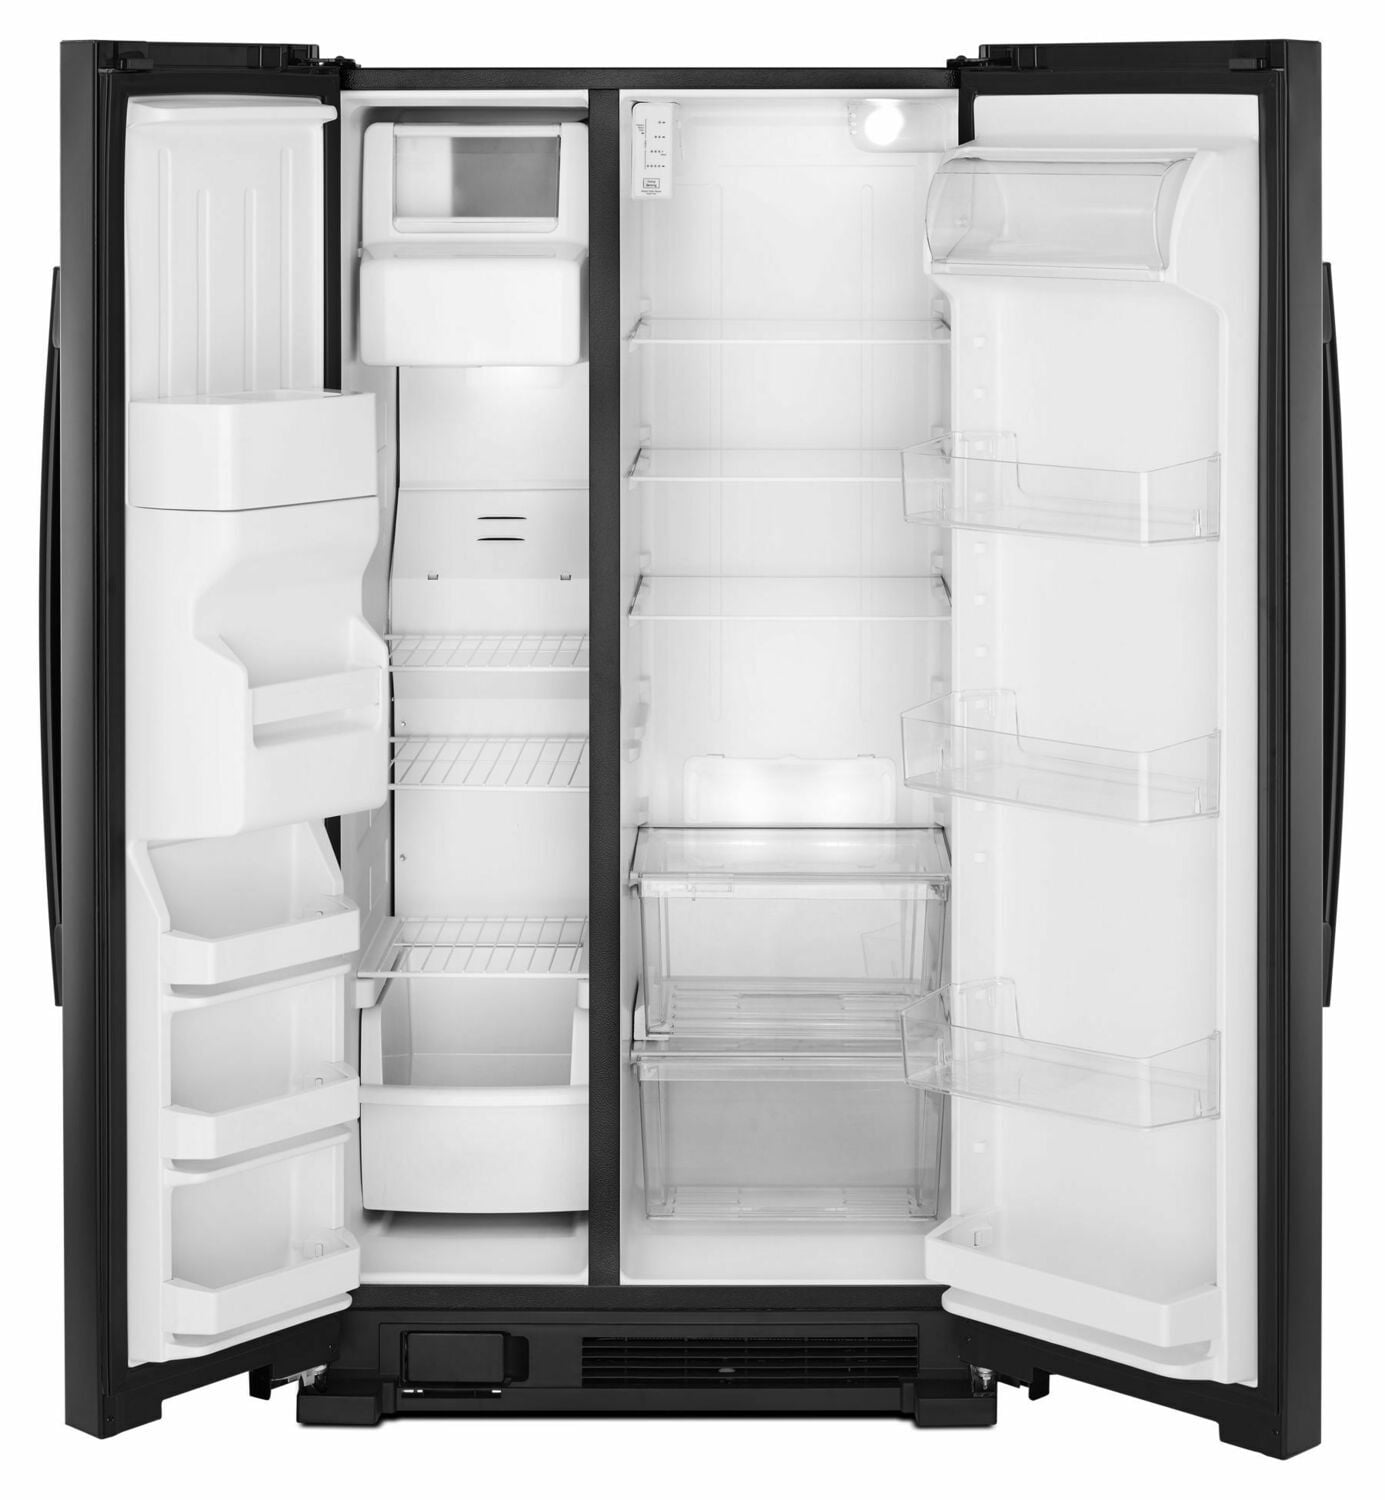 Amana ASI2175GRB 33-Inch Side-By-Side Refrigerator With Dual Pad External Ice And Water Dispenser - Black